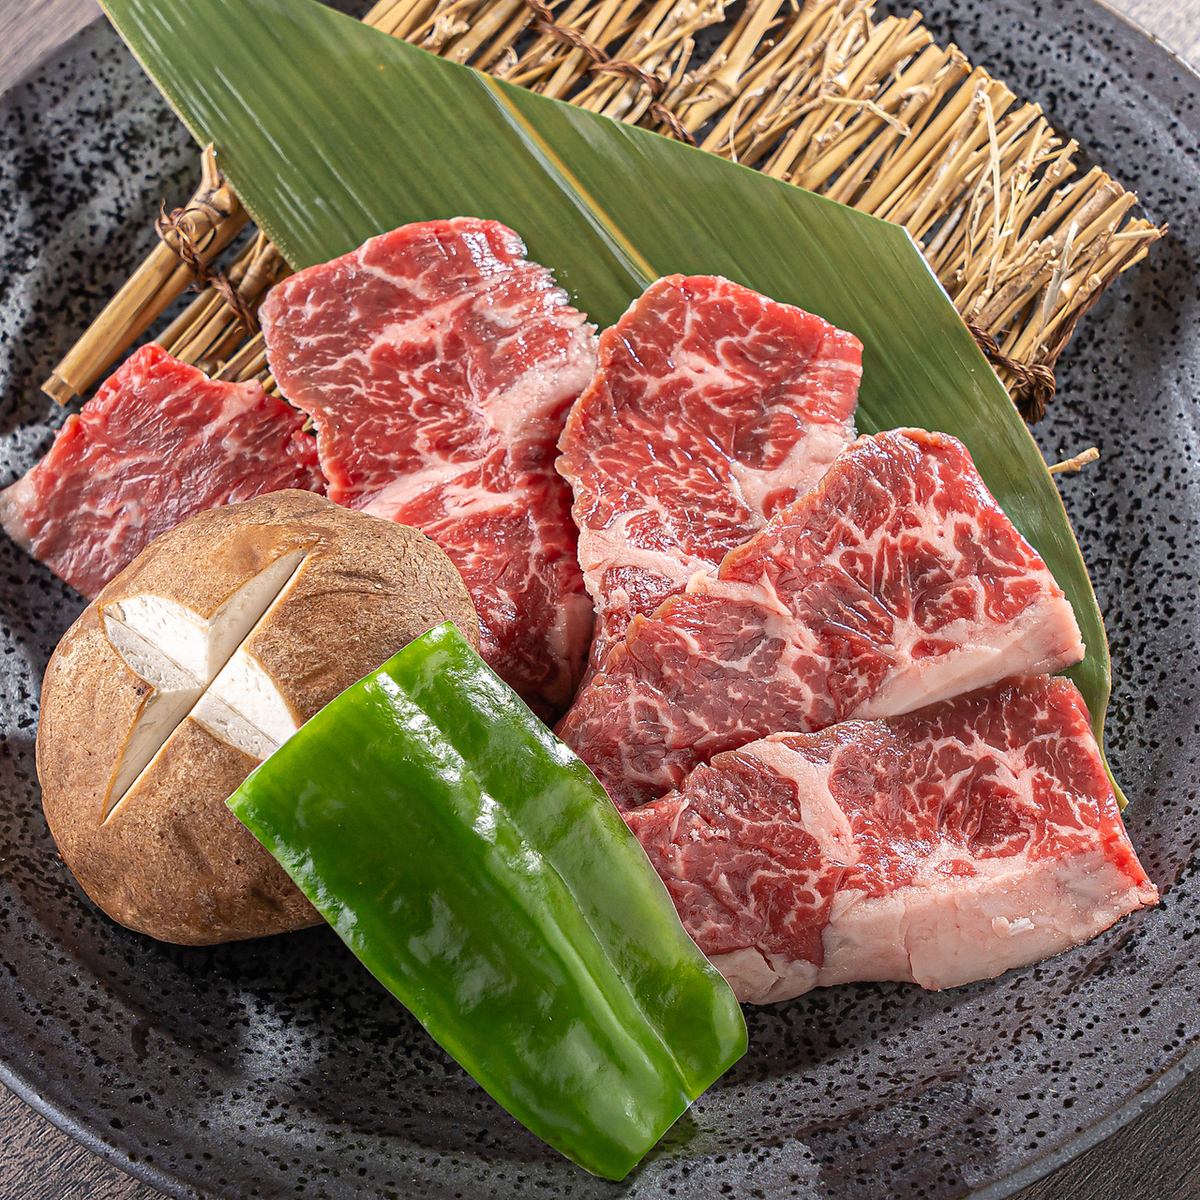 We offer a really delicious high-quality yakiniku lunch at a reasonable price.